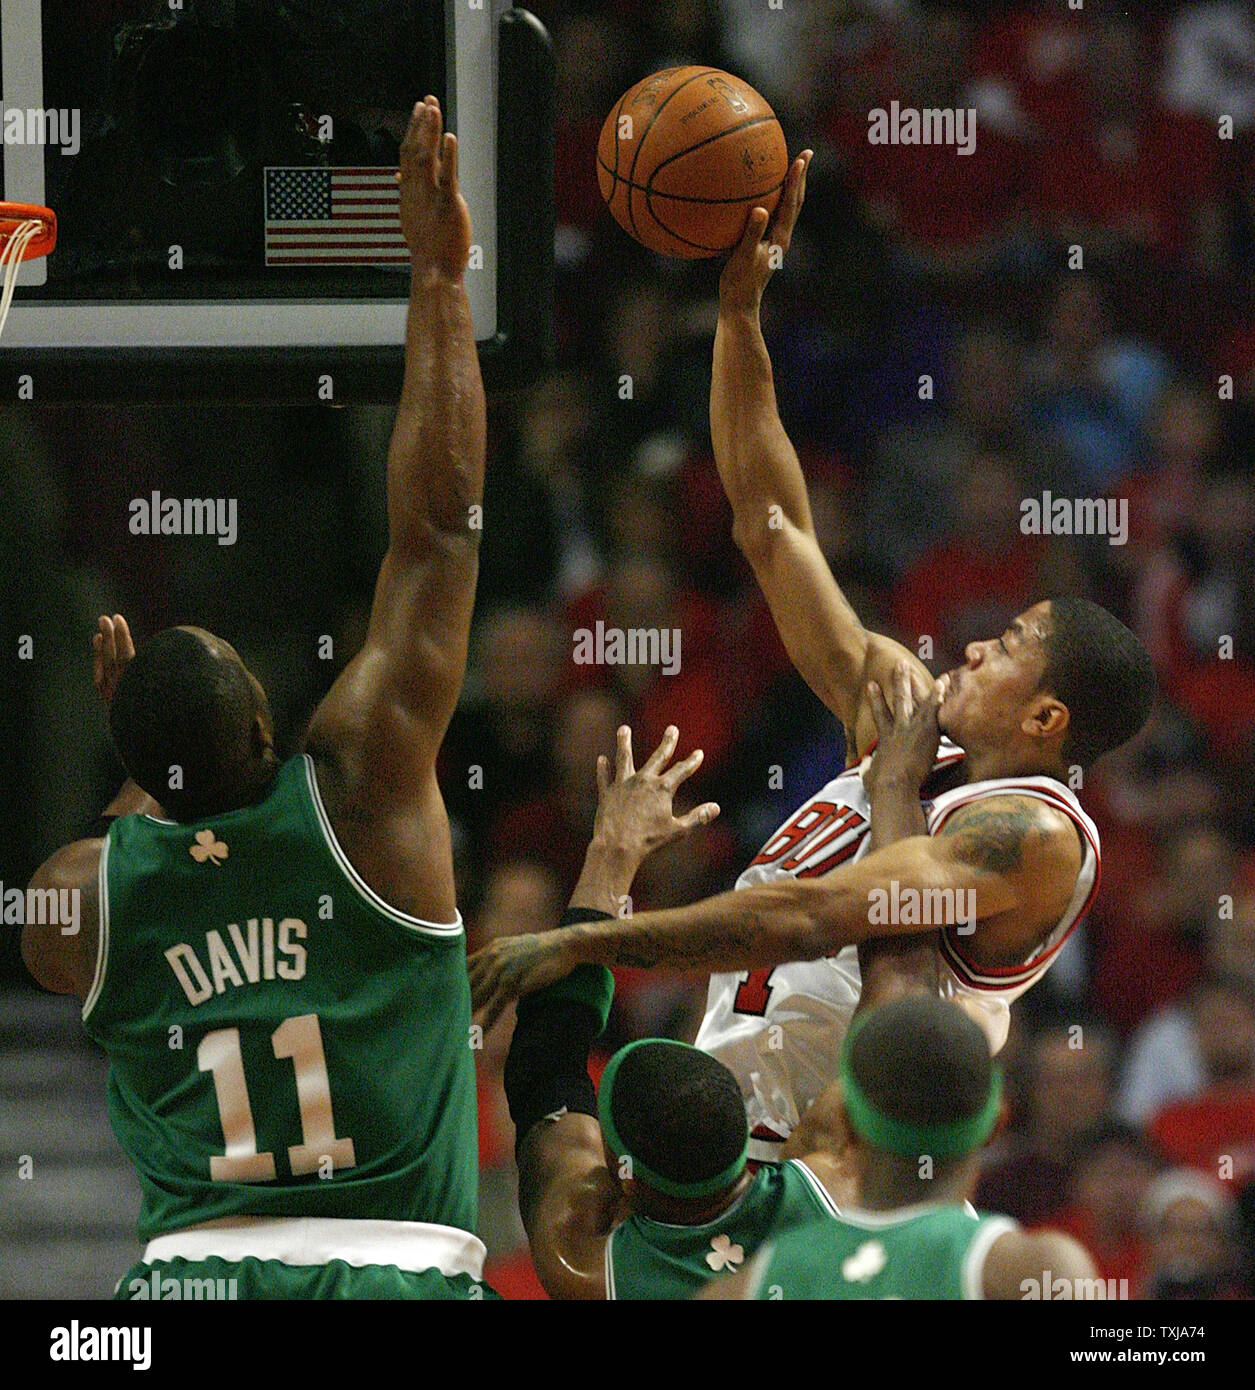 Chicago Bulls' Derrick Rose (L) goes up for a shot as Boston Celtics'  Glen Davis defends during the first quarter of game 3 of their NBA Eastern Conference Quarterfinal at the United Center in Chicago on April 23, 2009. (UPI Photo/Brian Kersey) Stock Photo